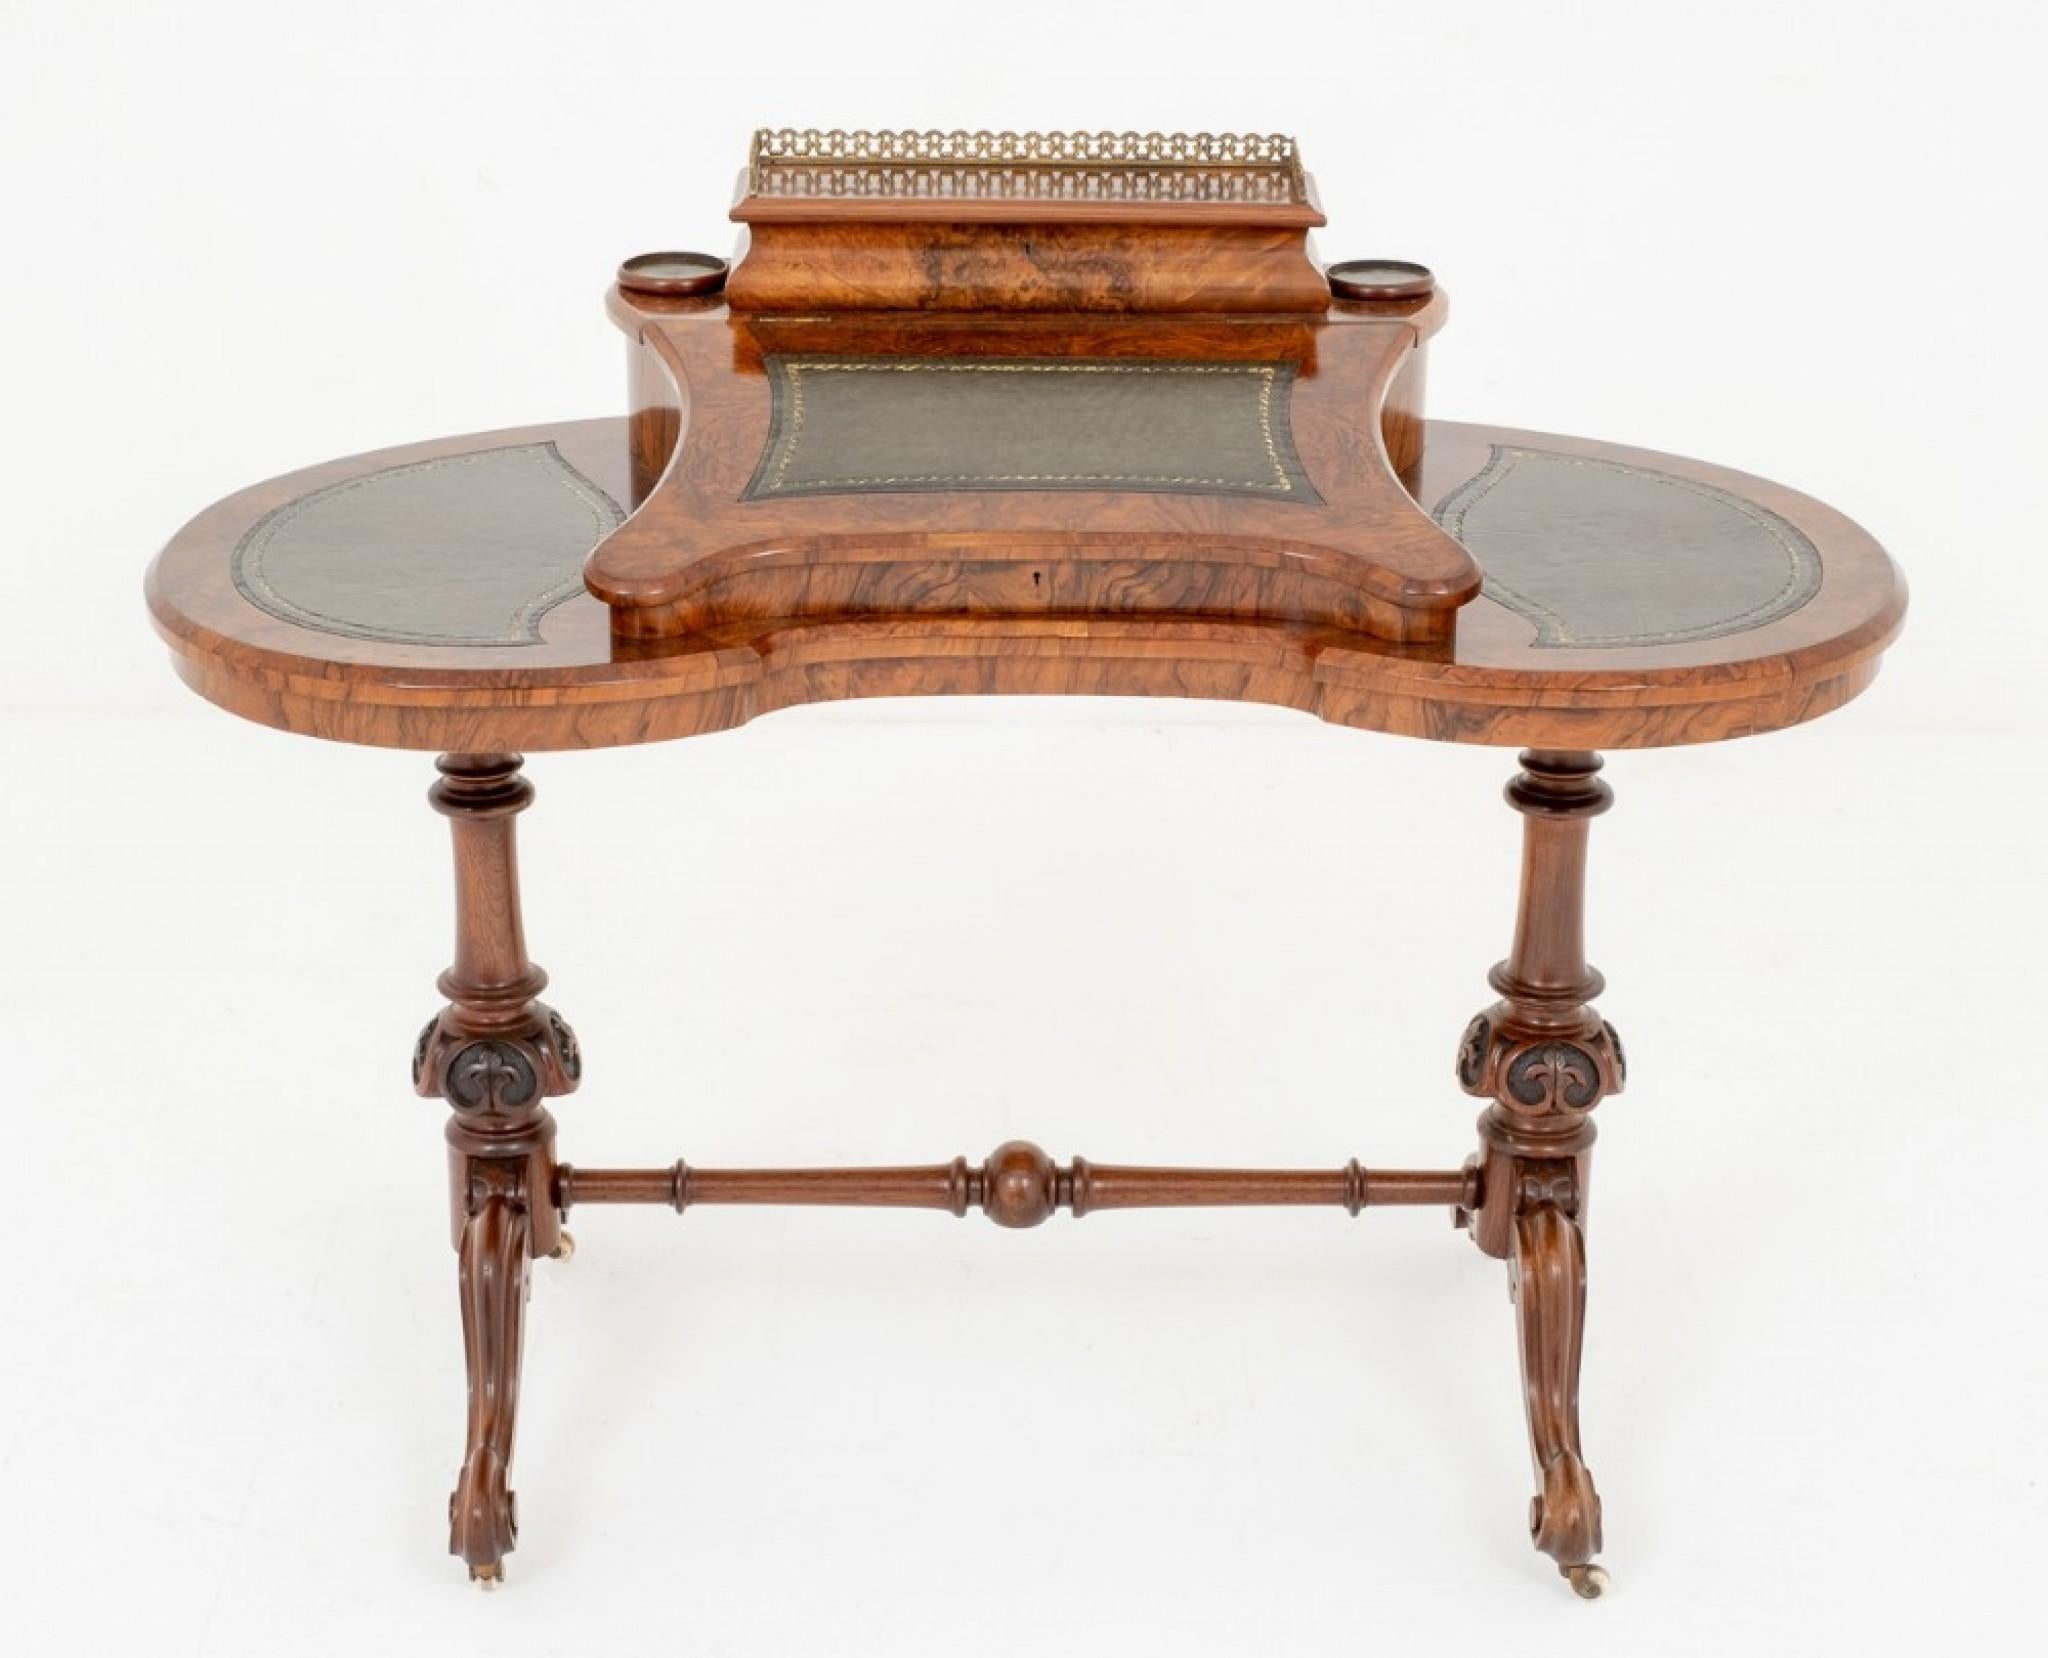 Pretty Victorian Walnut Shaped Writing Table.
Circa 1860
Standing on Shaped Carved Legs with a Ring Turned Stretcher and Turned and Carved Uprights.
The Kidney Shaped top featuring a raised writing slope with lift up pen and letter rack , topped